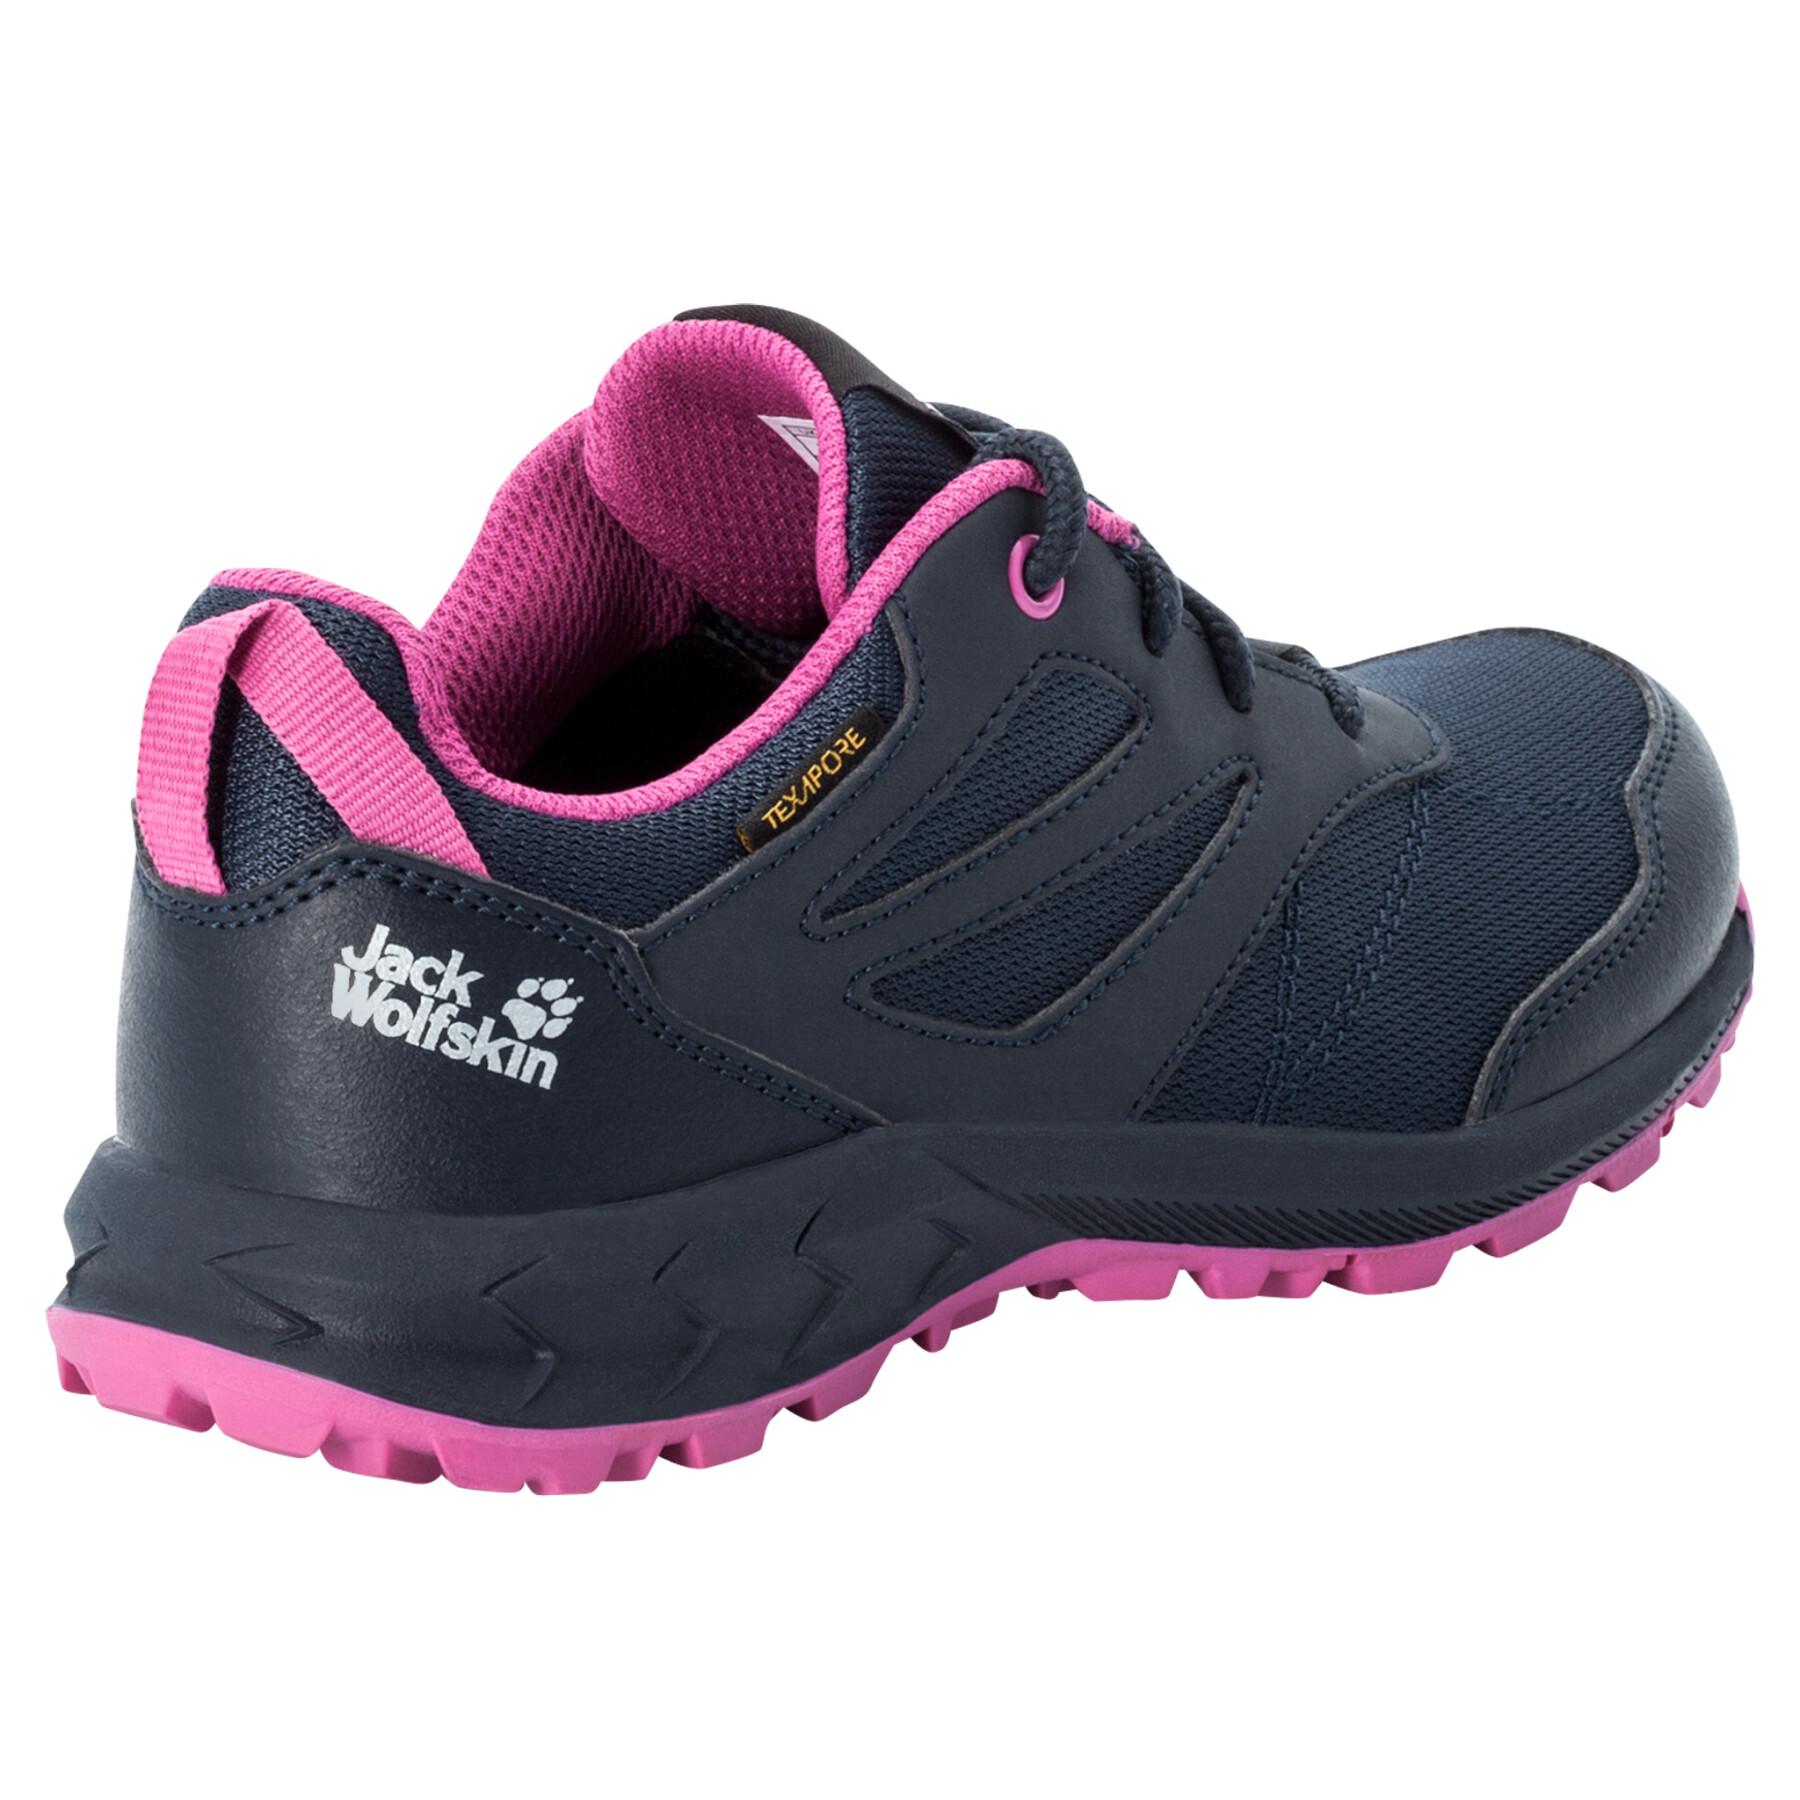 Chaussures enfant Jack Wolfskin woodland texapore low